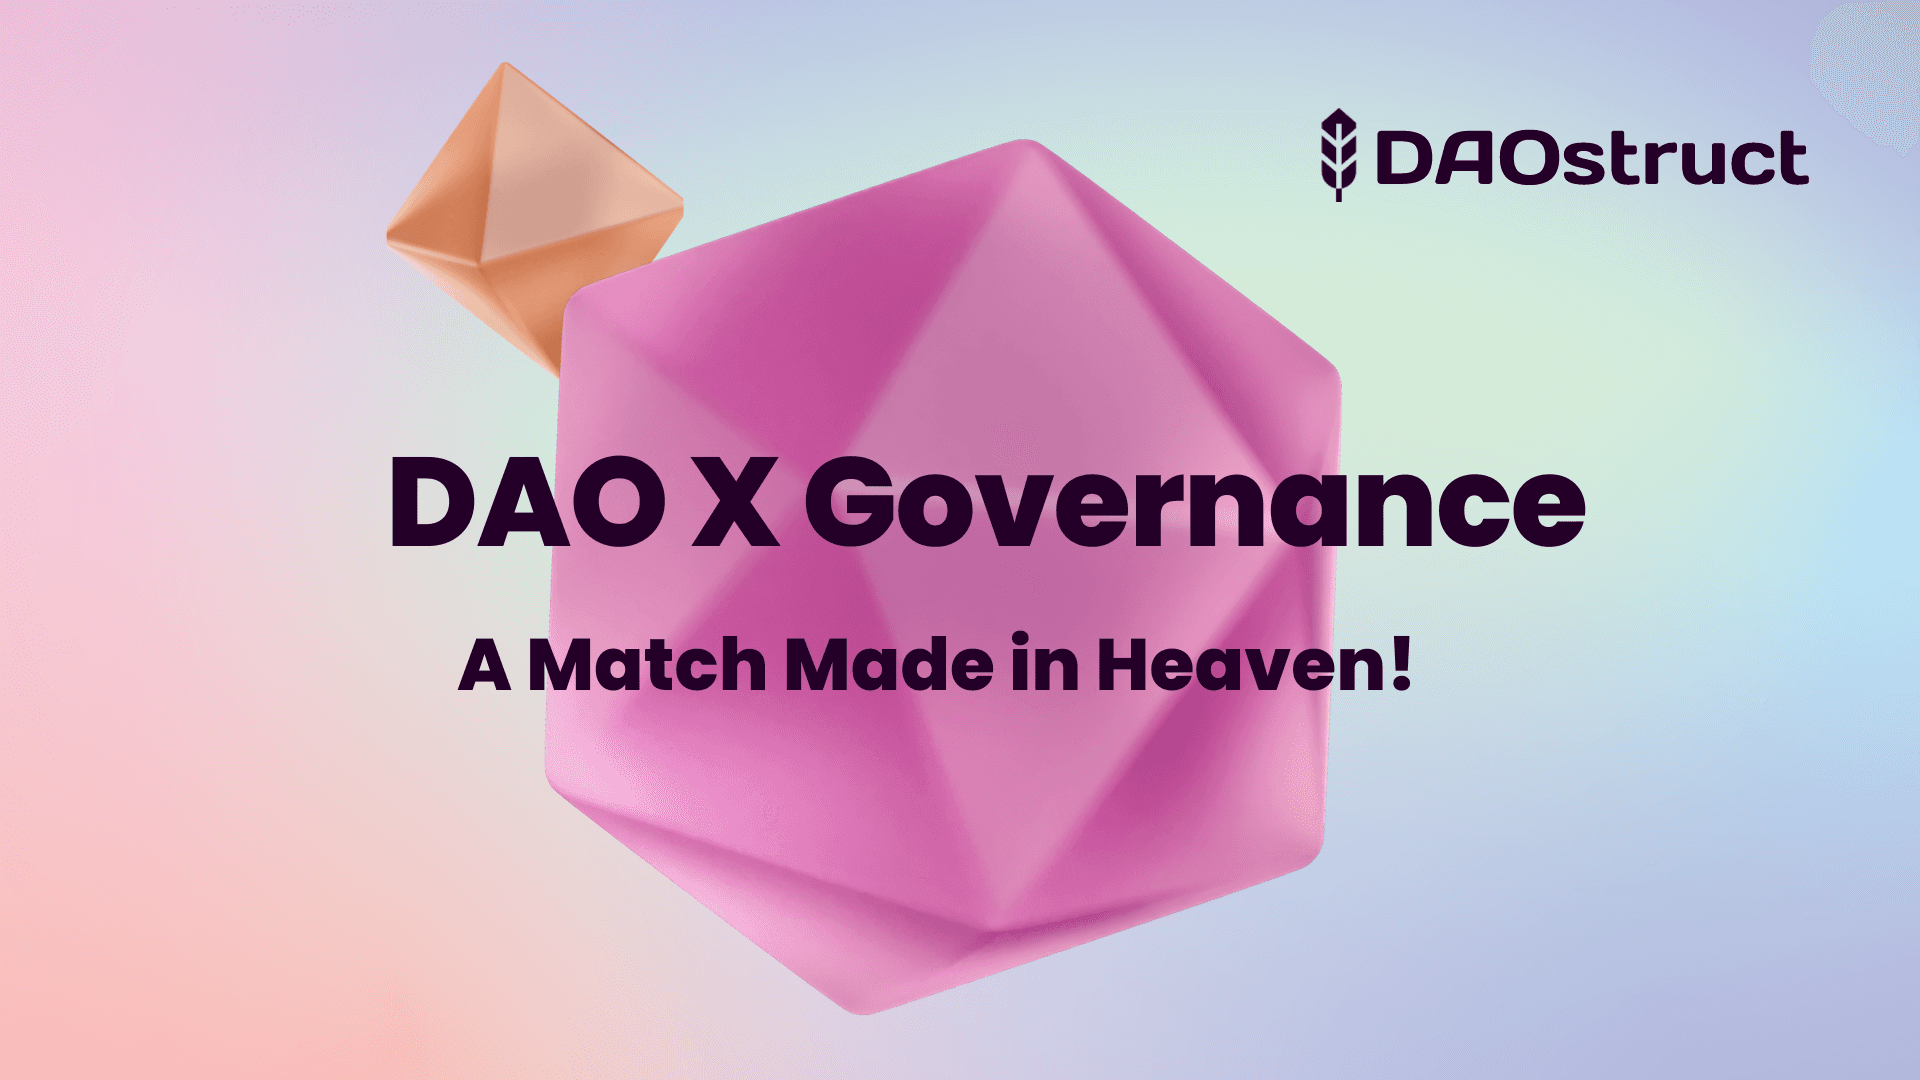 Part I : DAOs x Governance - A Match Made in Heaven!